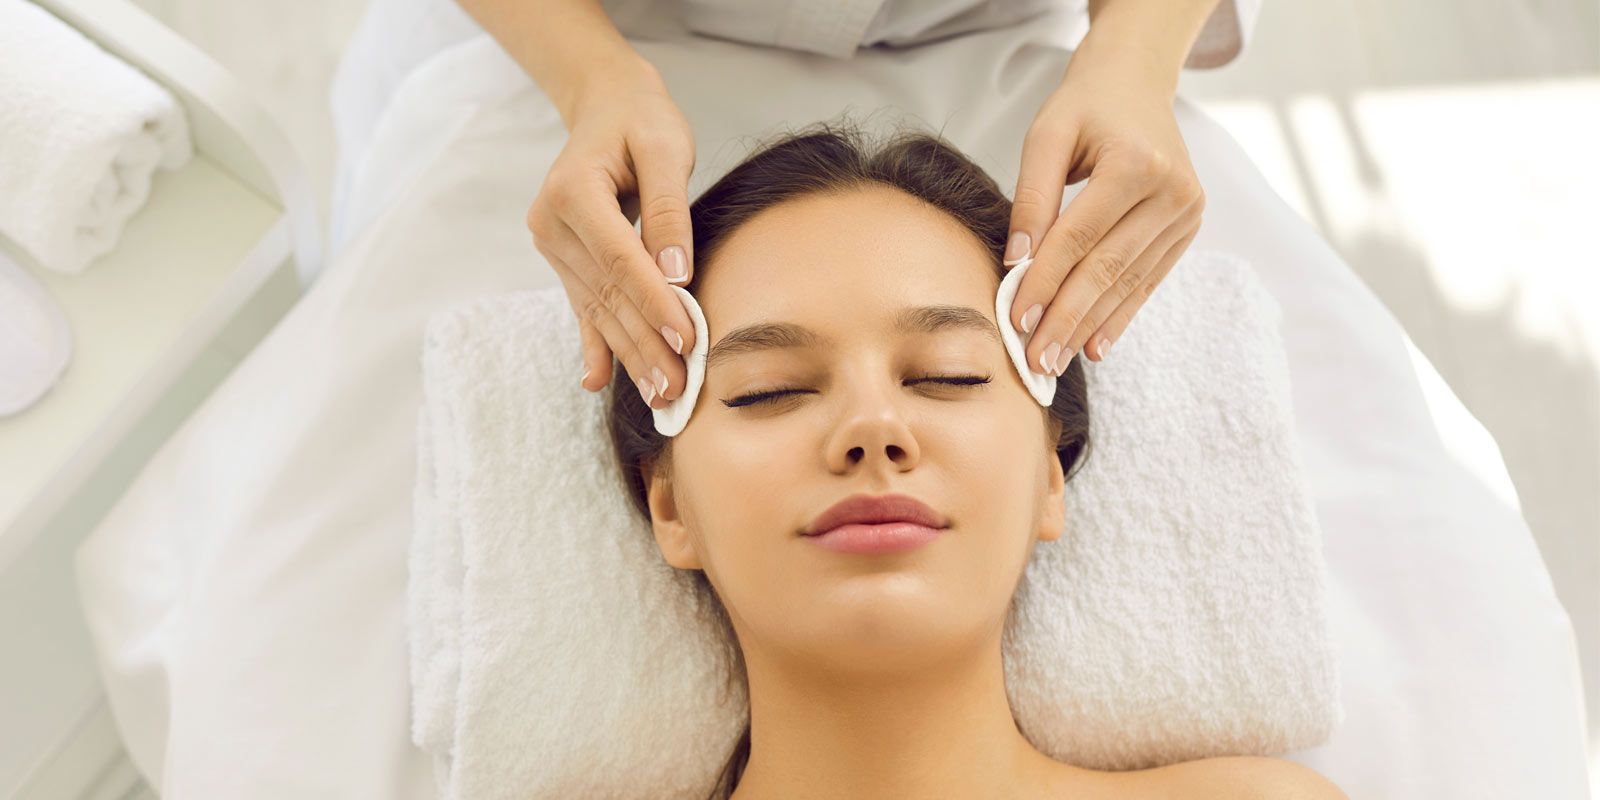 Esthetician NYC Services at Chill Space Health and Wellness Spa Convenient Licensed Esthetician Services in Manhattan NY 